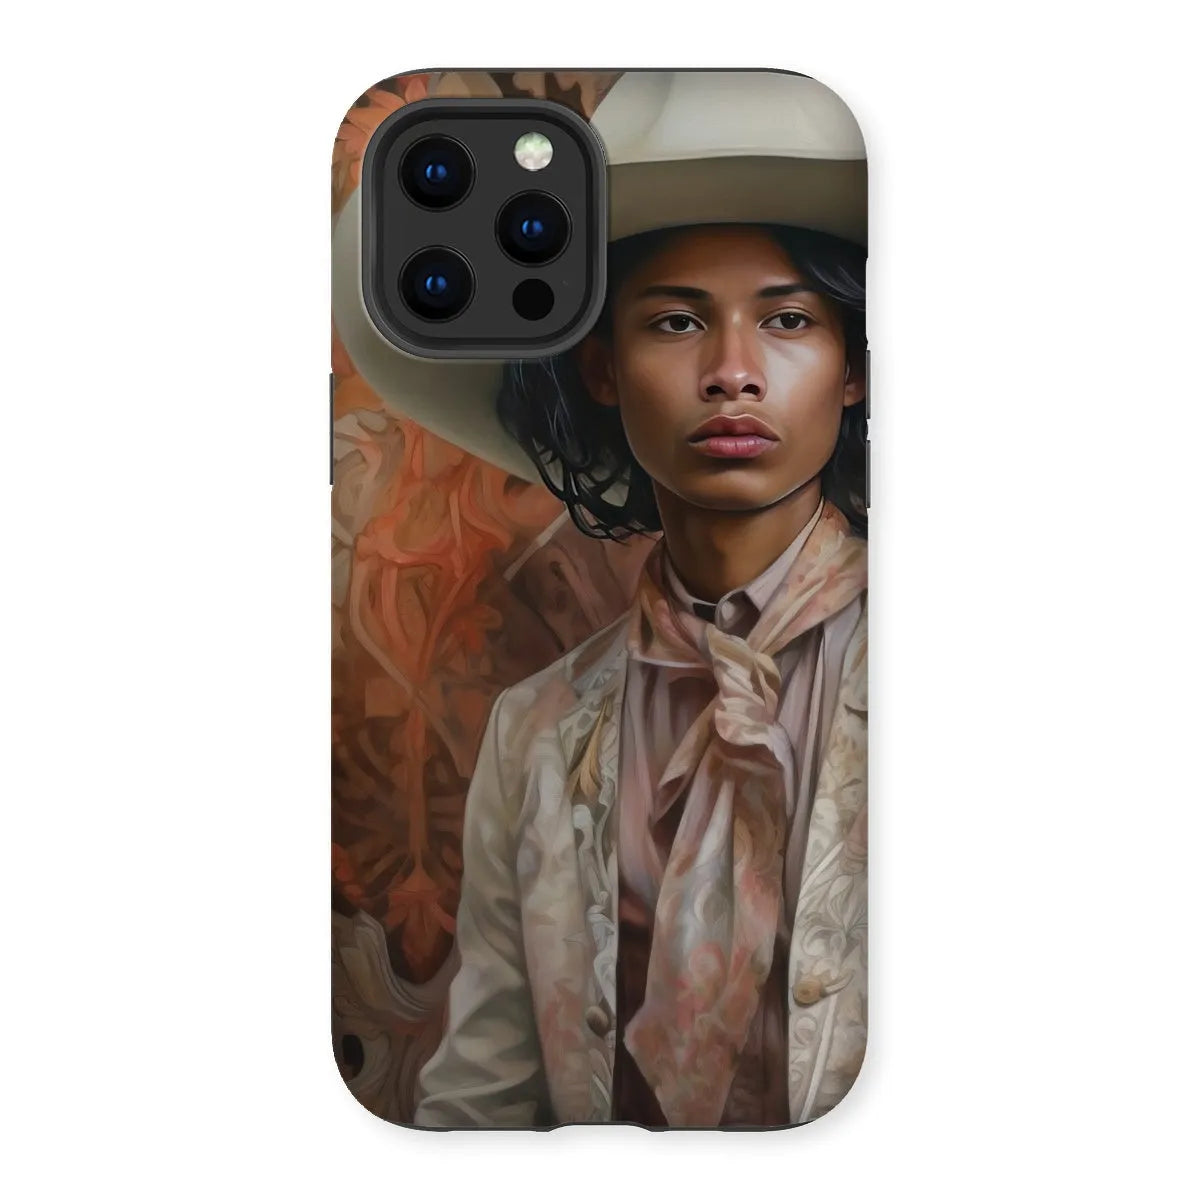 Arjuna The Gay Cowboy - Gay Aesthetic Art Phone Case - Iphone 13 Pro Max / Matte - Mobile Phone Cases - Aesthetic Art